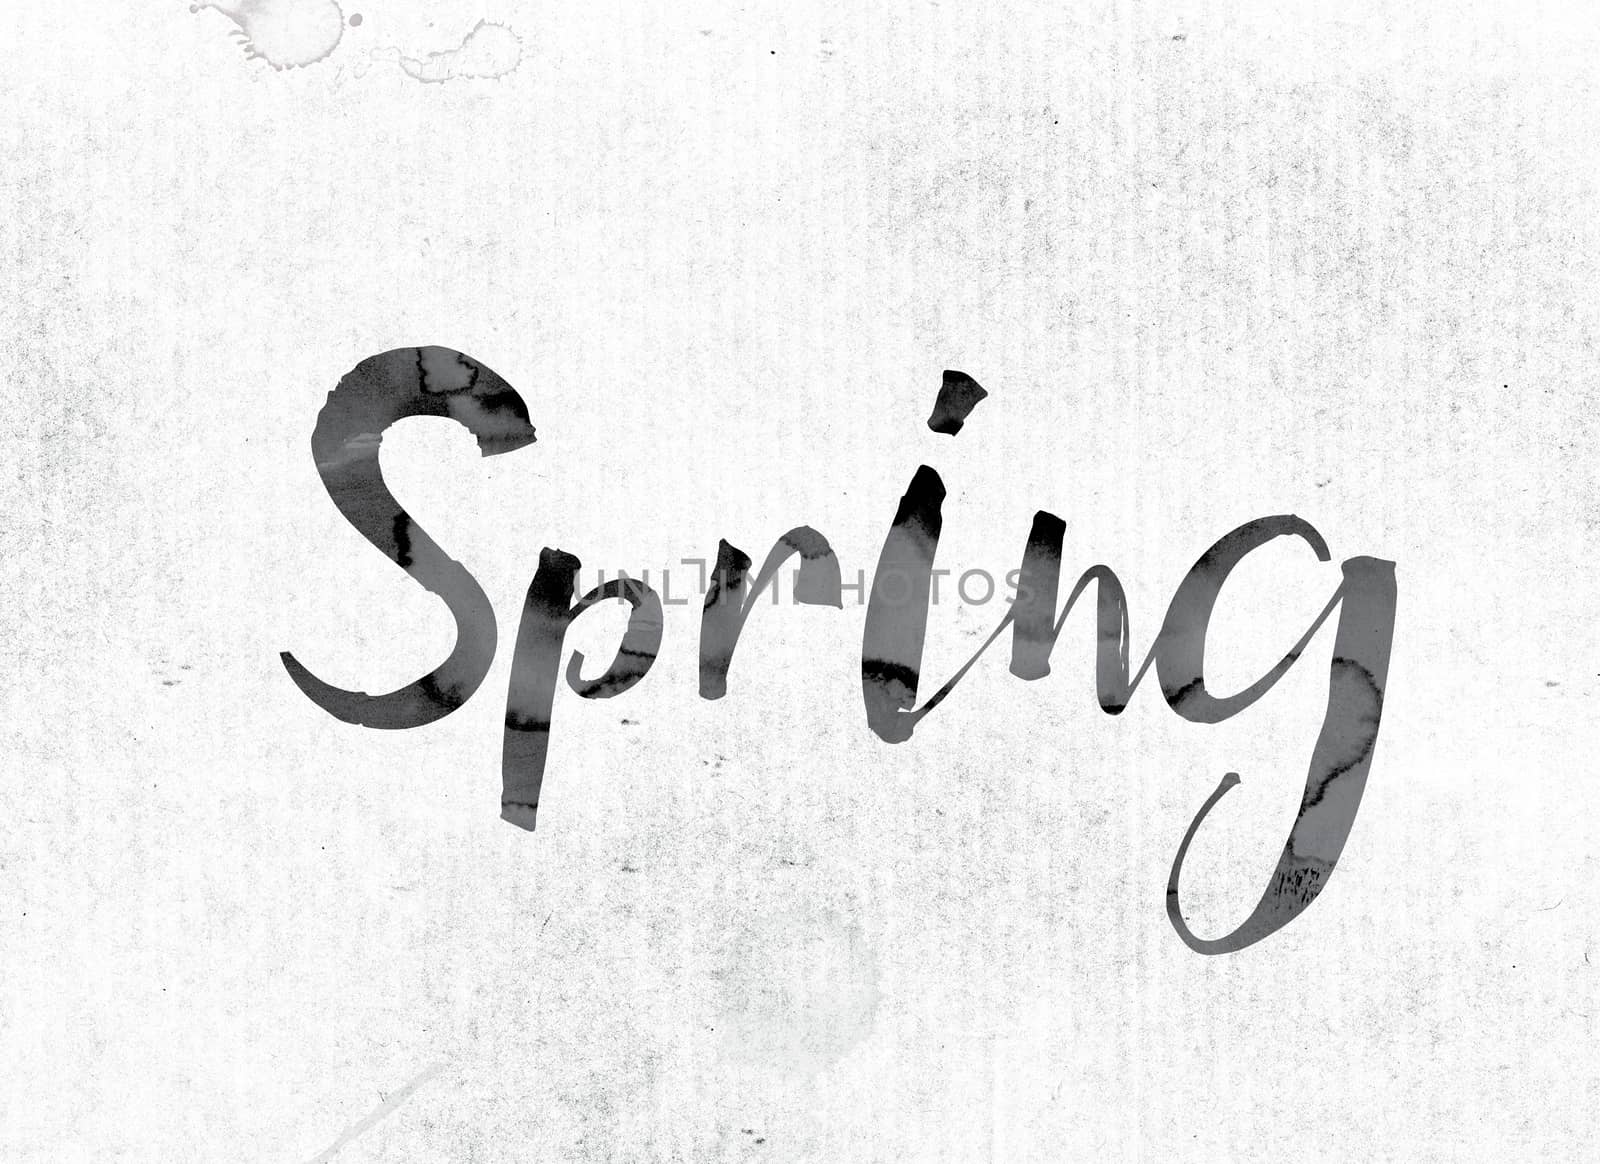 The word "Spring" concept and theme painted in watercolor ink on a white paper.